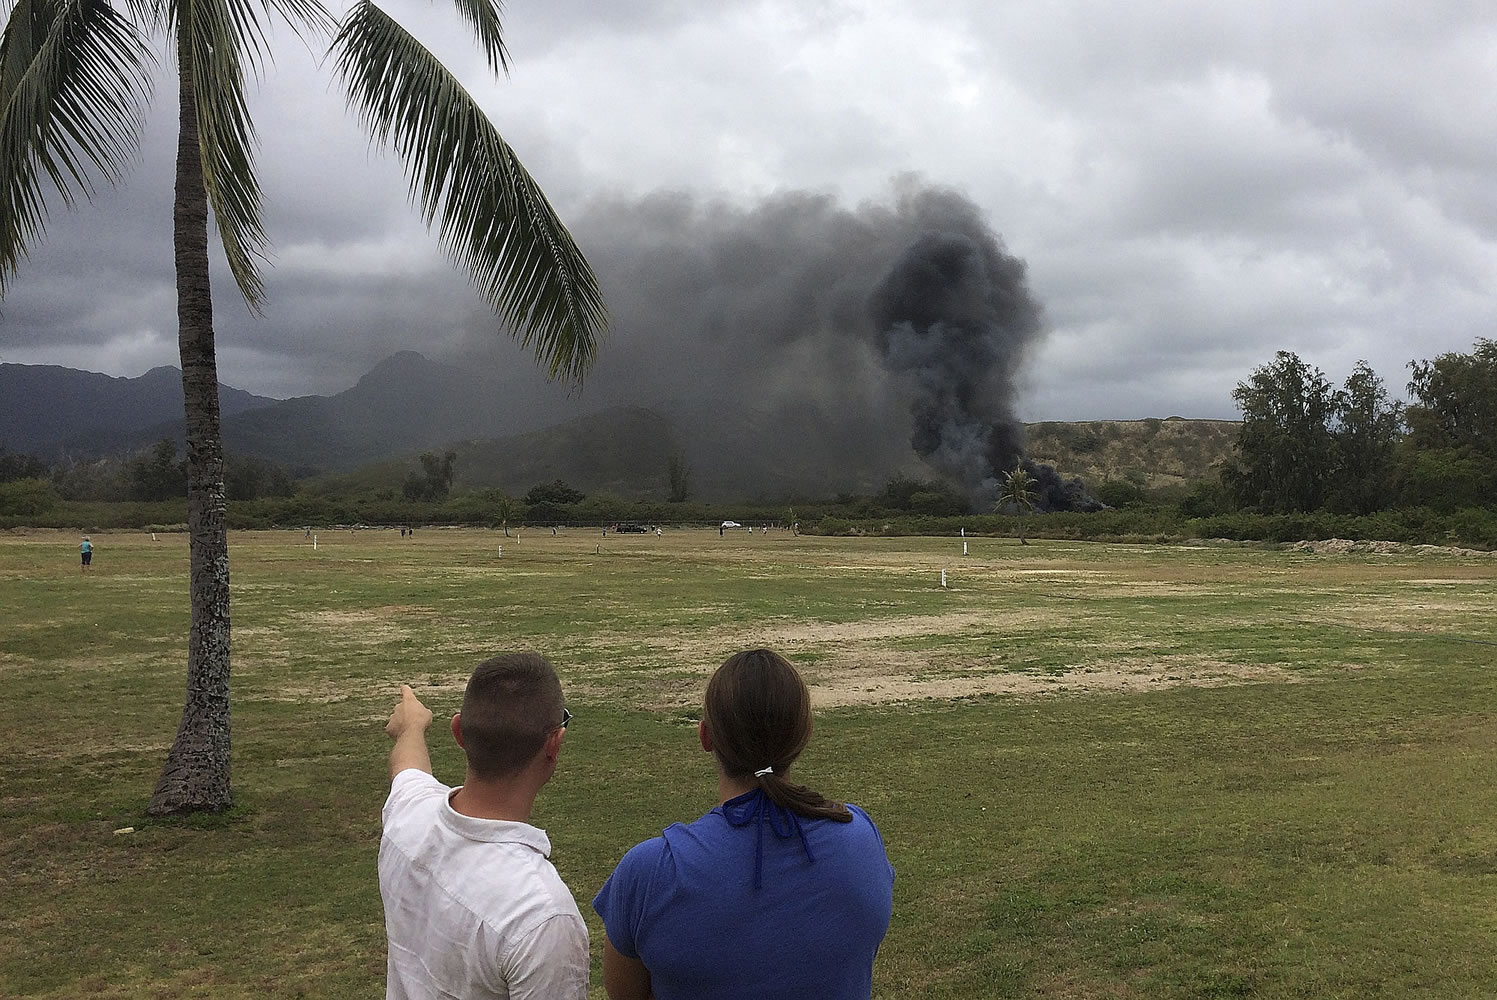 A man and woman look toward smoke rising from a Marine Corps Osprey aircraft after making a hard landing on Bellows Air Force Station near Waimanalo, Hawaii.